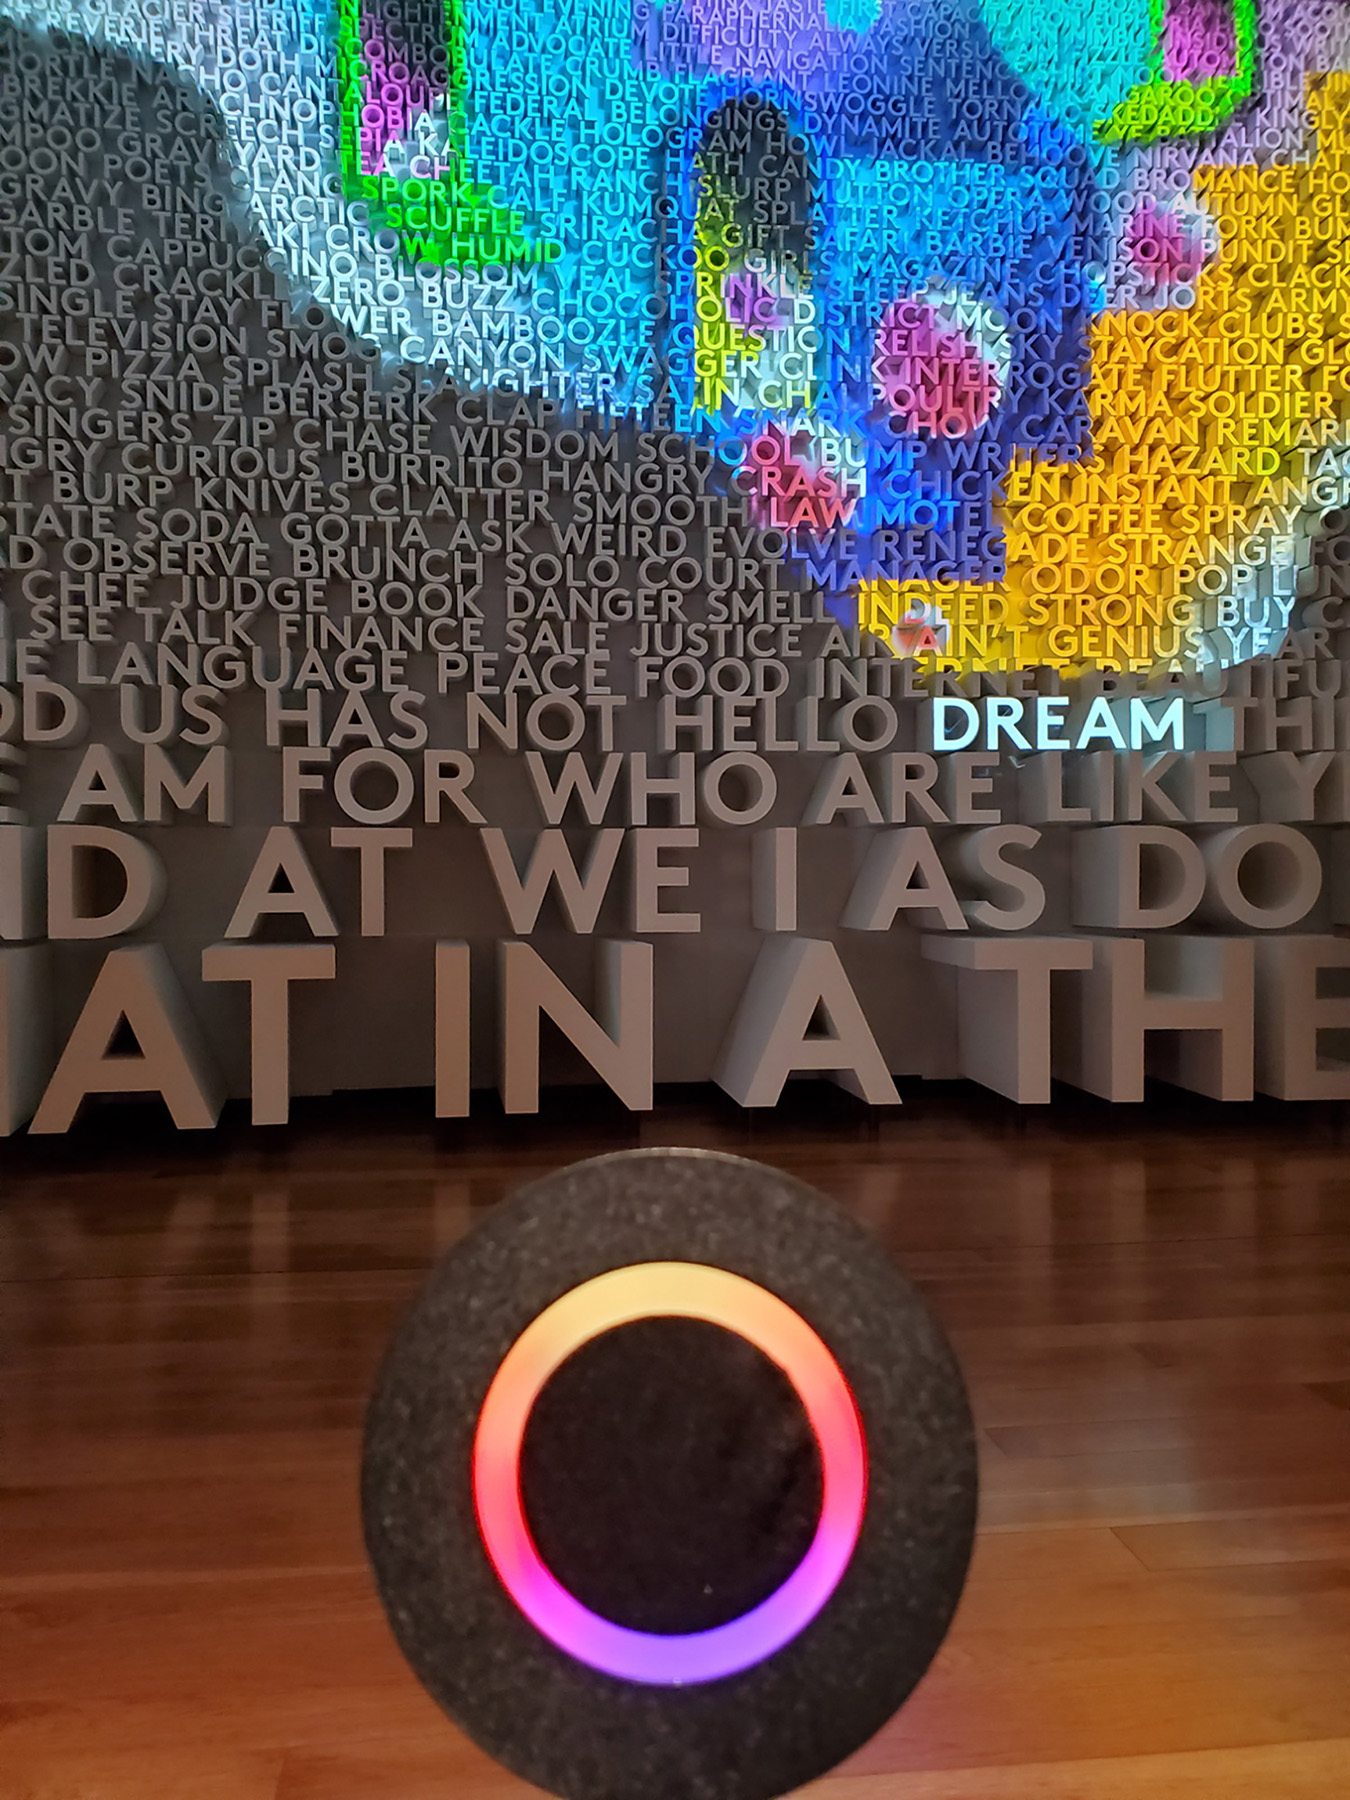 A circular microphone stands in the foreground with a rainbow light at the center. In the background three dimensional words in ascending sizes cover the wall all the way out of the frame of the photo. Projected onto the wall is a spread of abstract shapes in bright yellow, pink, blue, purple, and green. The word dream is the only purposefully highlighted word, glowing in the light from the projector.